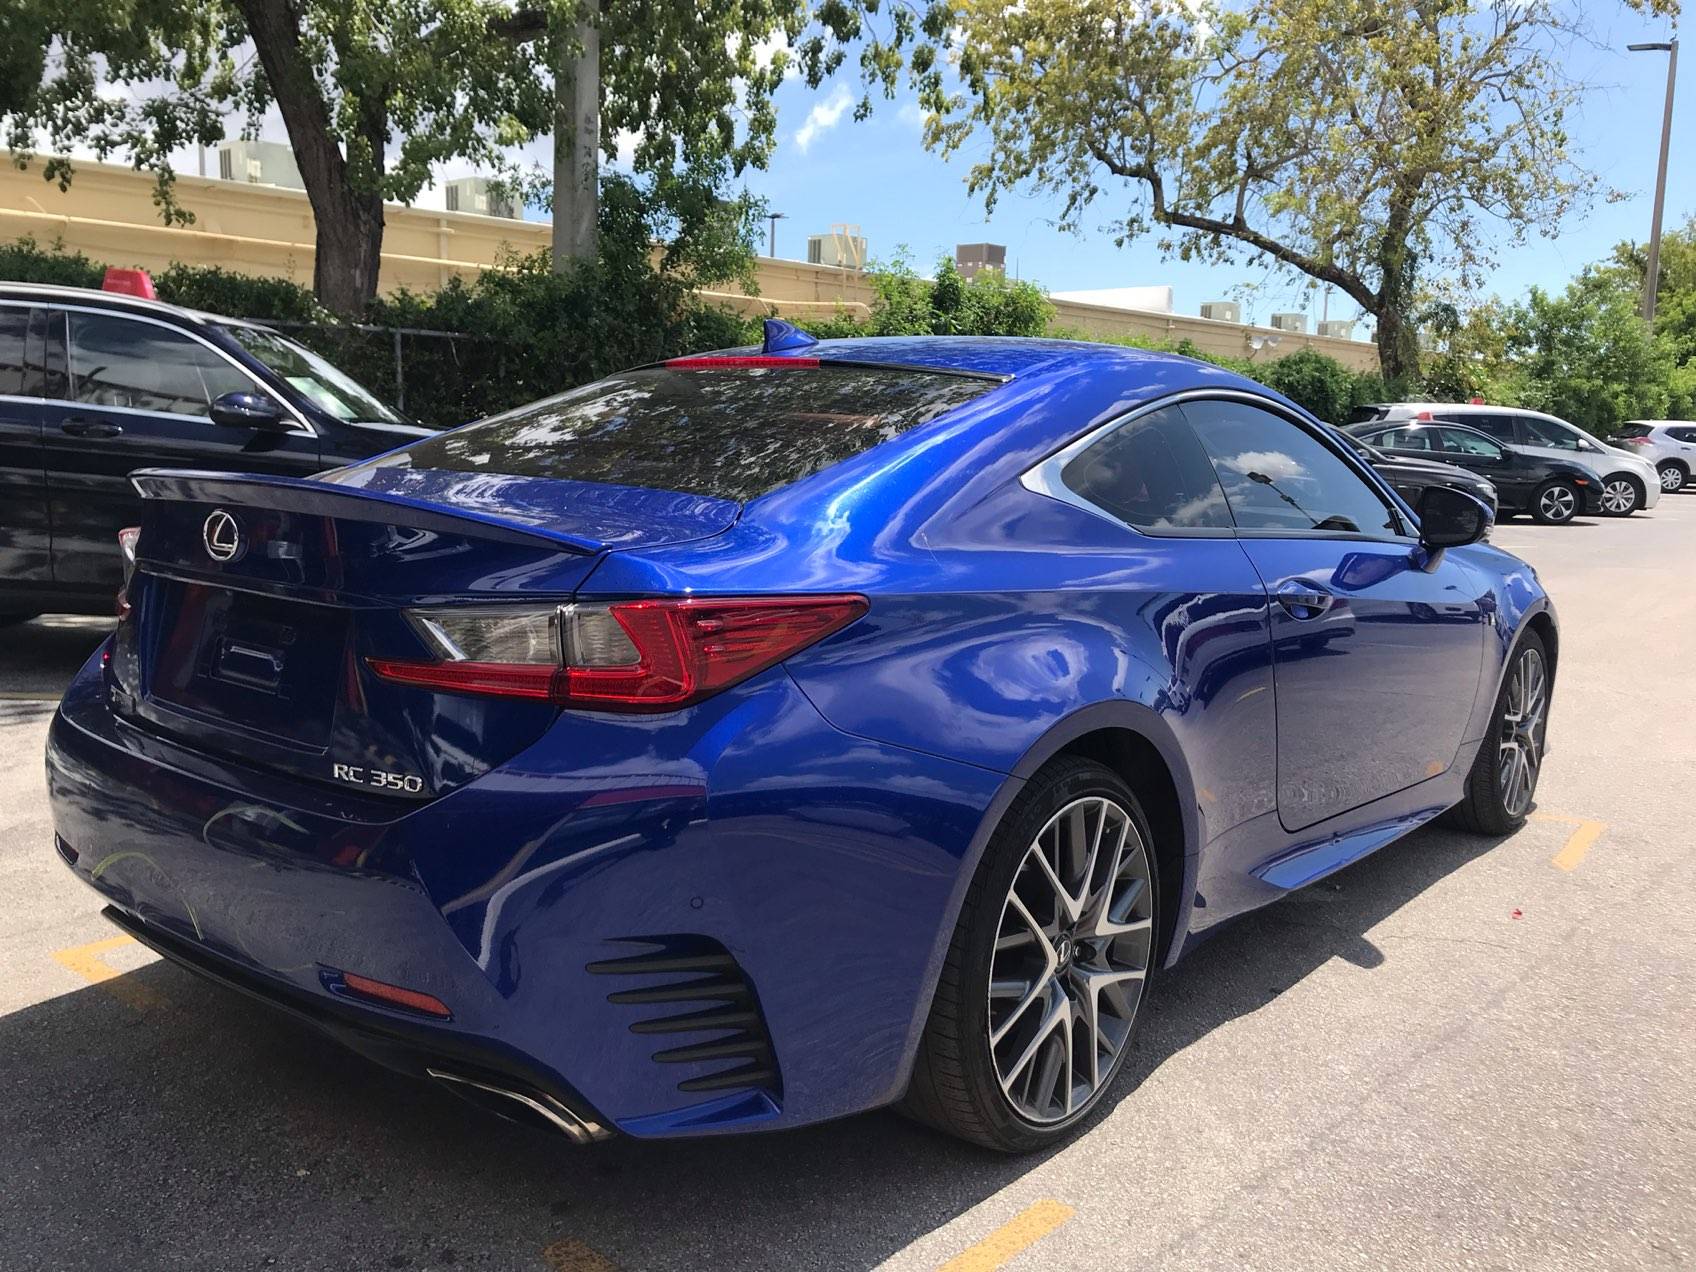 Used 2015 LEXUS RC 350 F Sport Coupe for sale in MIAMI, FL ...